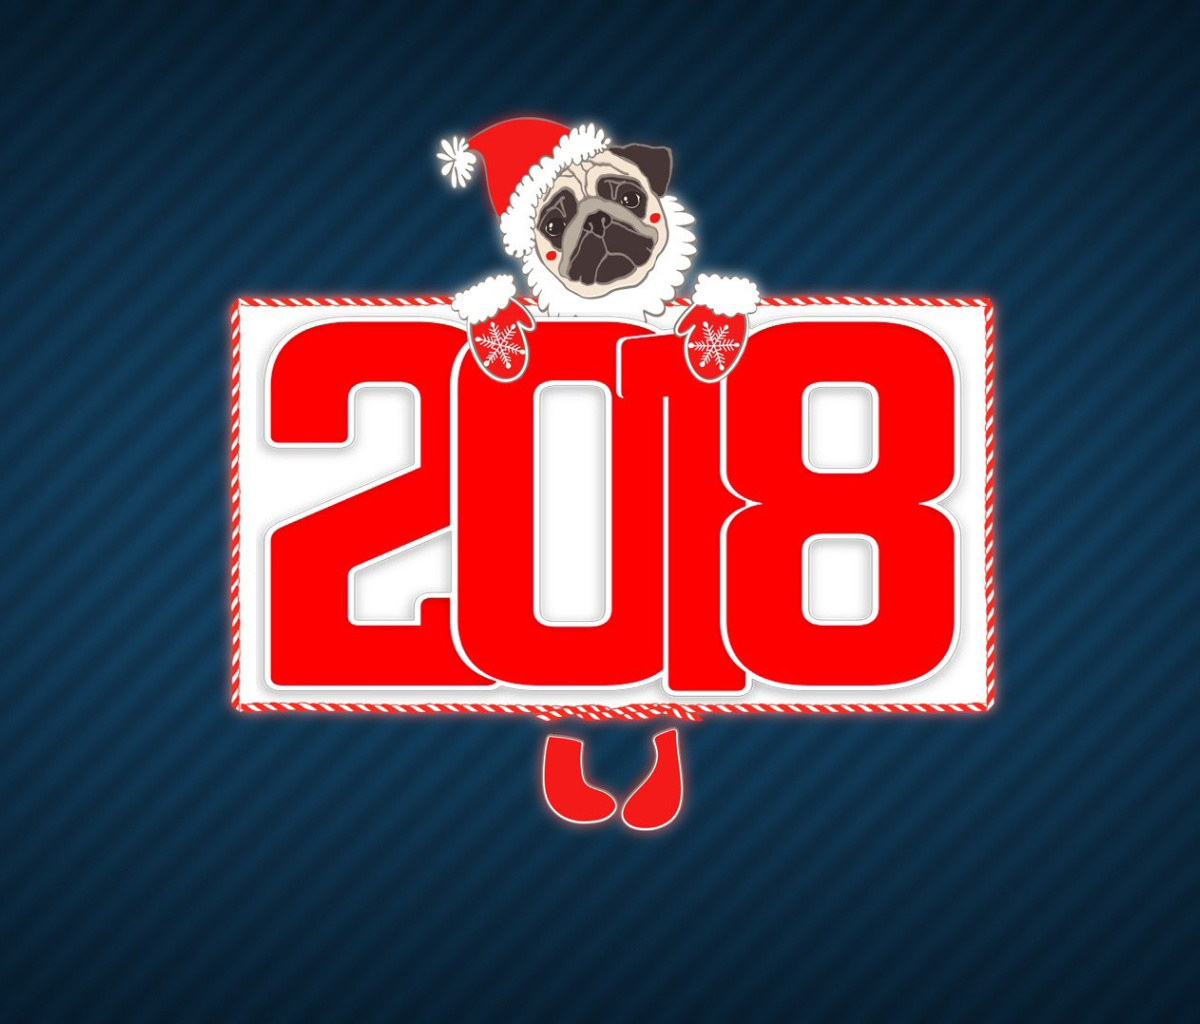 2018 New Year Chinese horoscope year of the Dog wallpaper 1200x1024